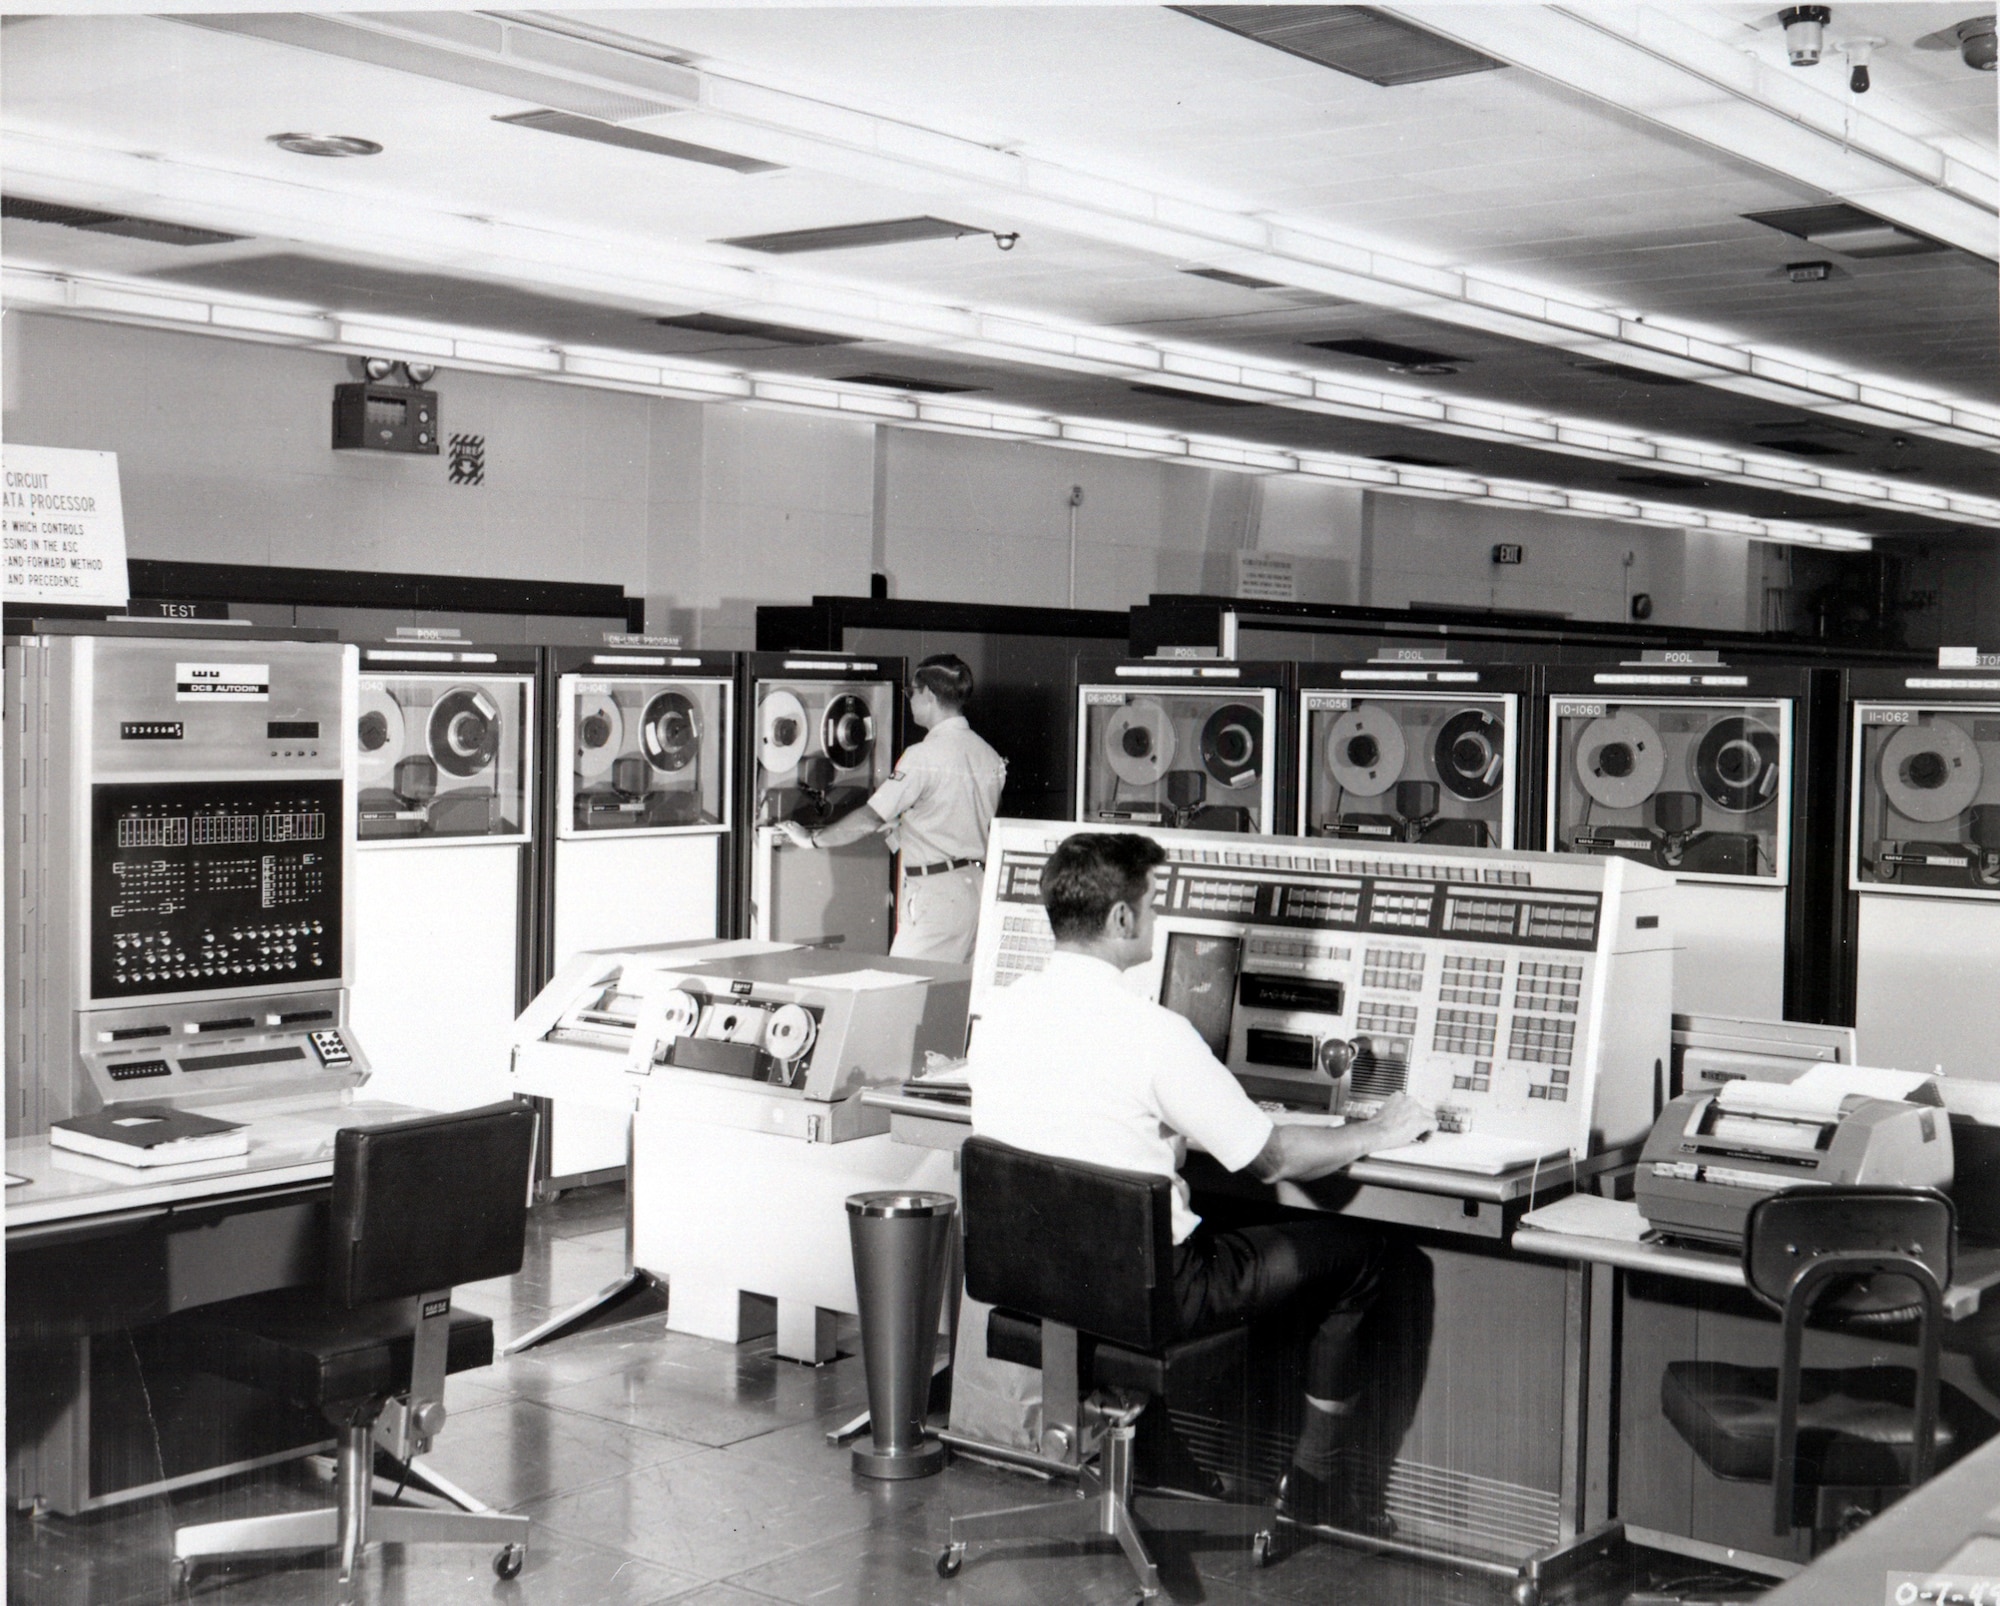 Interior view of the McClellan AFB AUTODIN Switching Center. (Courtesy of the AFNIC History Office)